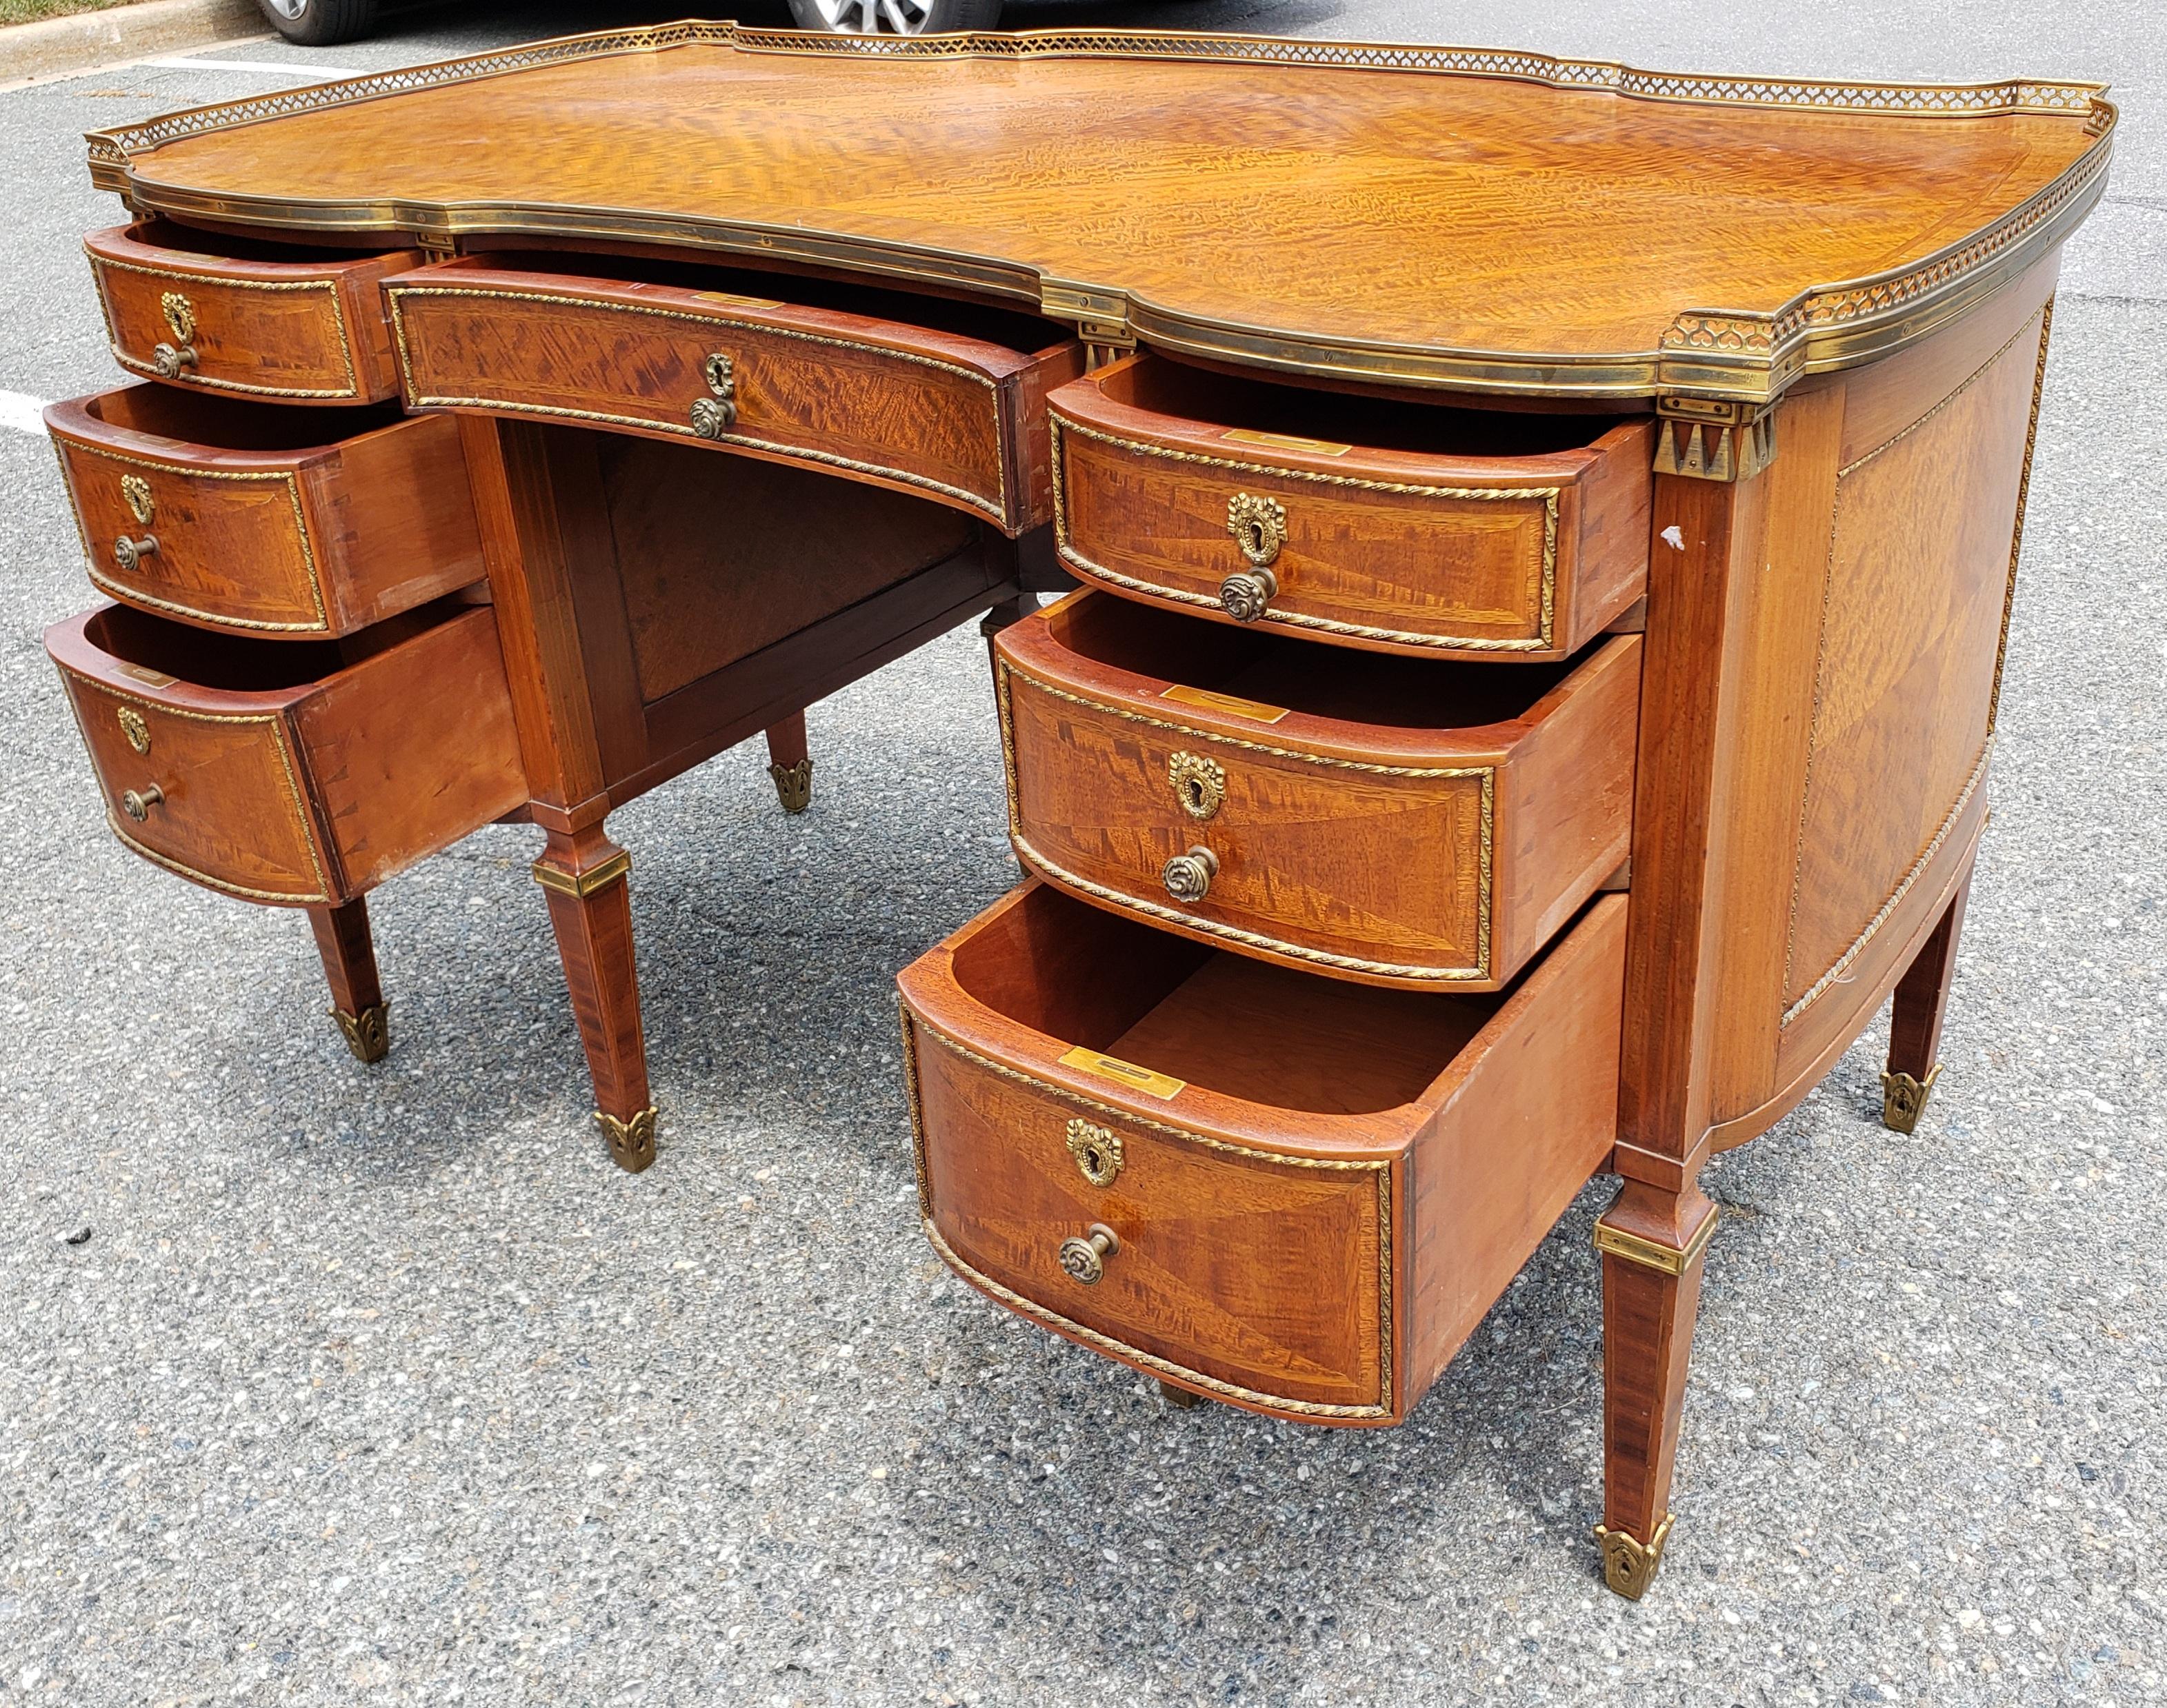 20th Century Louis XVI Style Ormolu Mounted Galleried Mahogany Burl and Marquetry Desk  For Sale